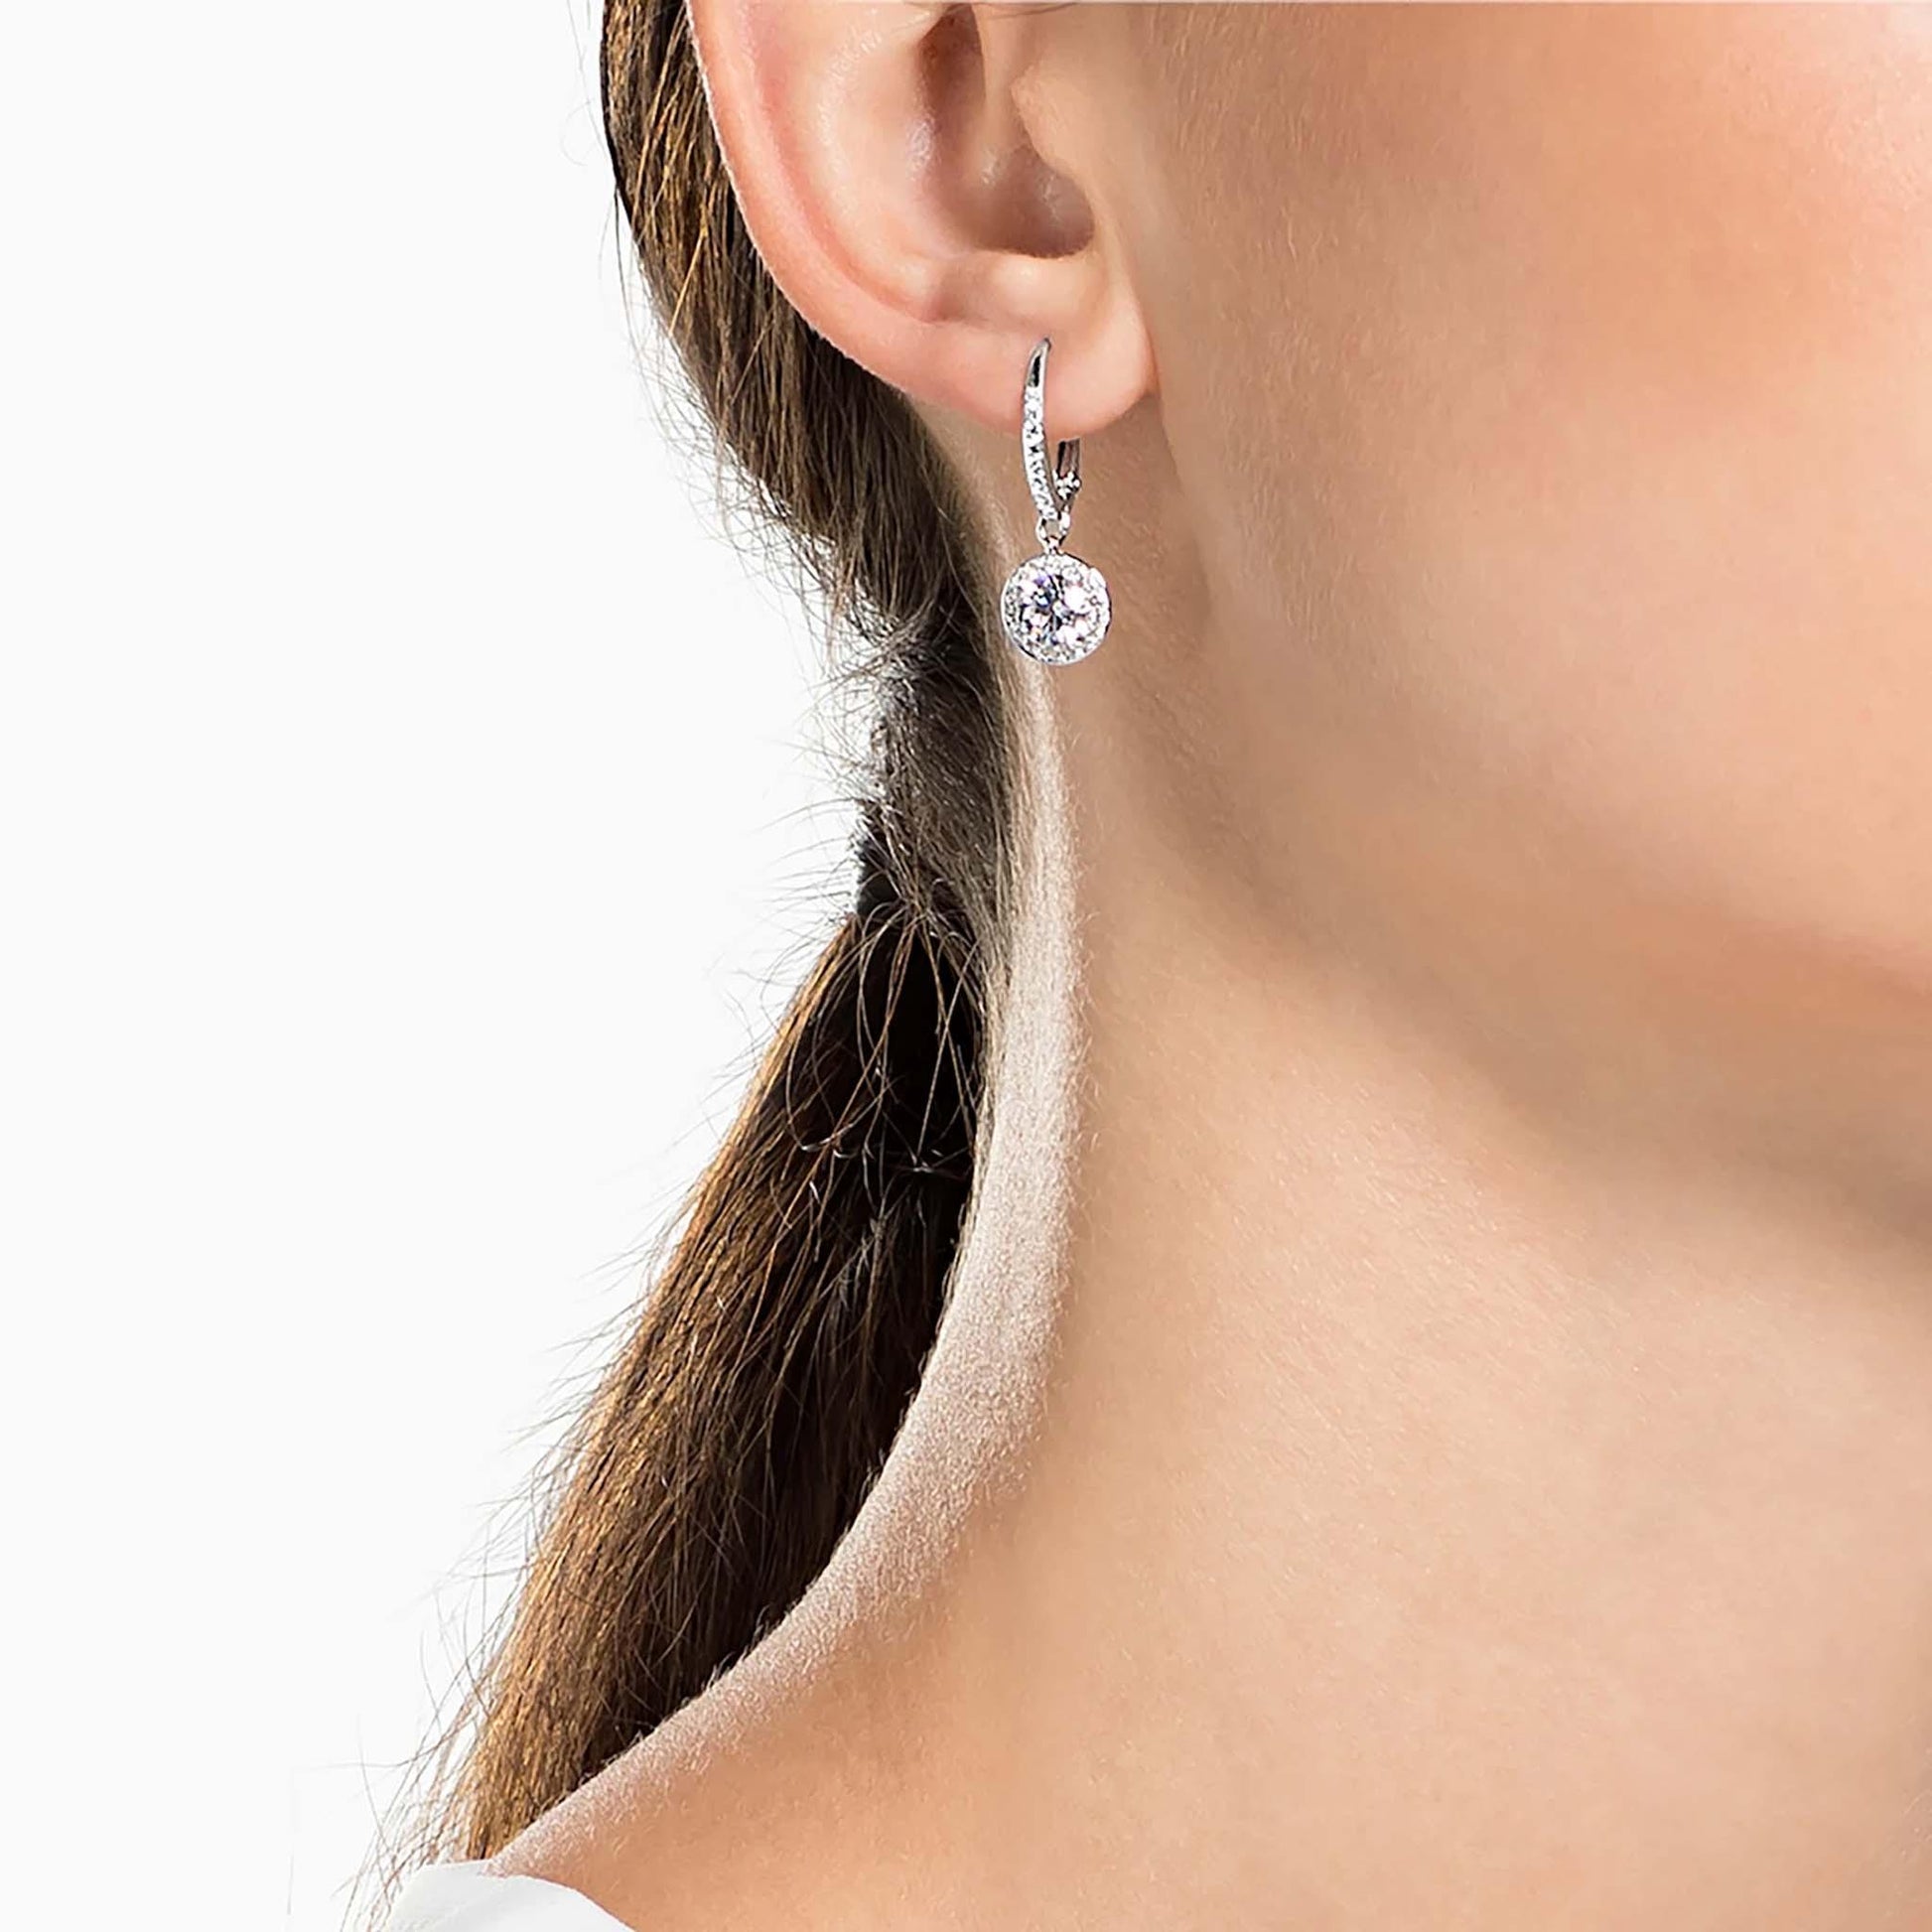 Angelic earrings - Cosmos Boutique New Jersey